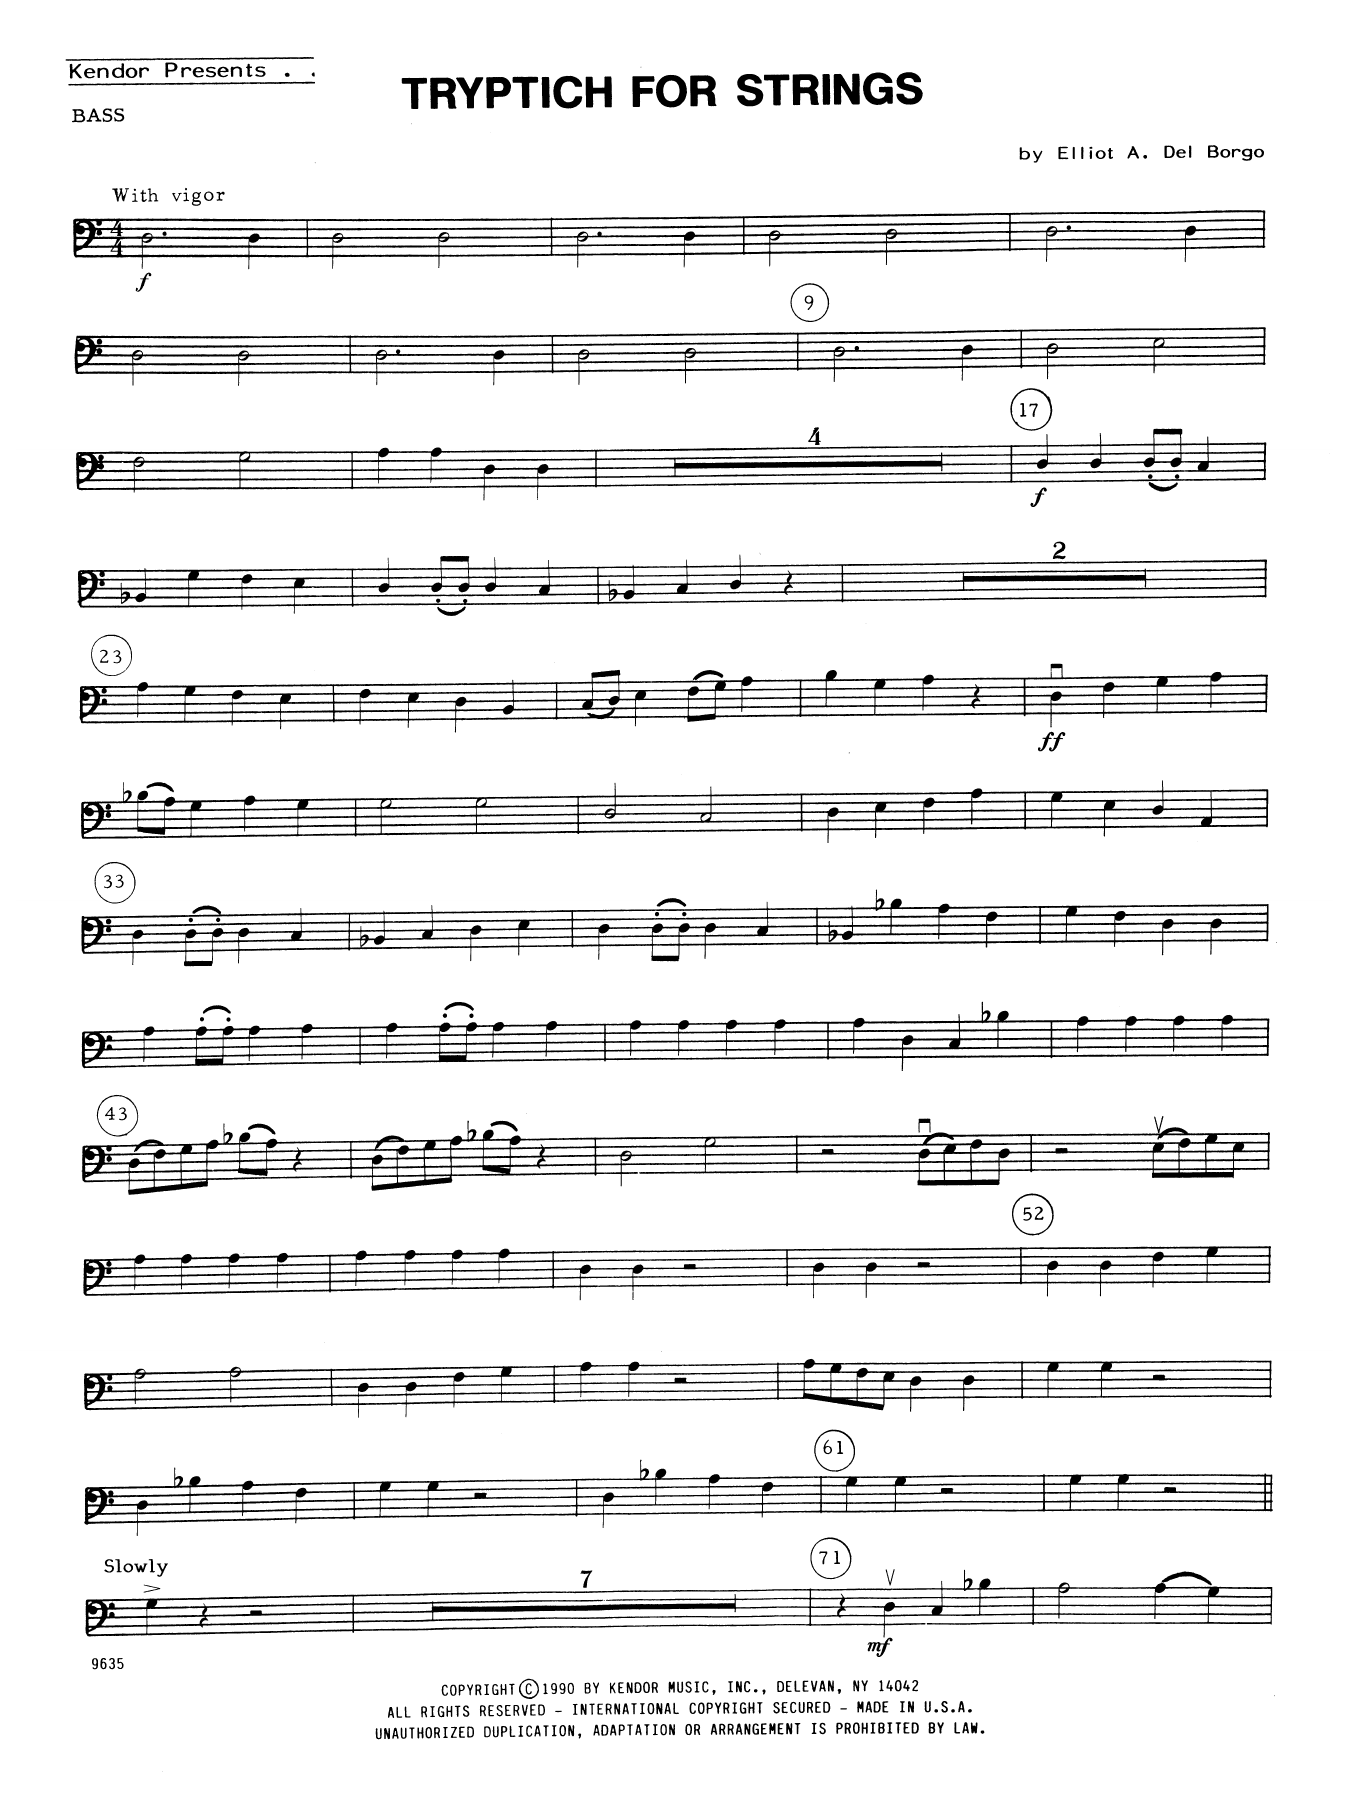 Download Elliot A. Del Borgo Tryptich For Strings - Bass Sheet Music